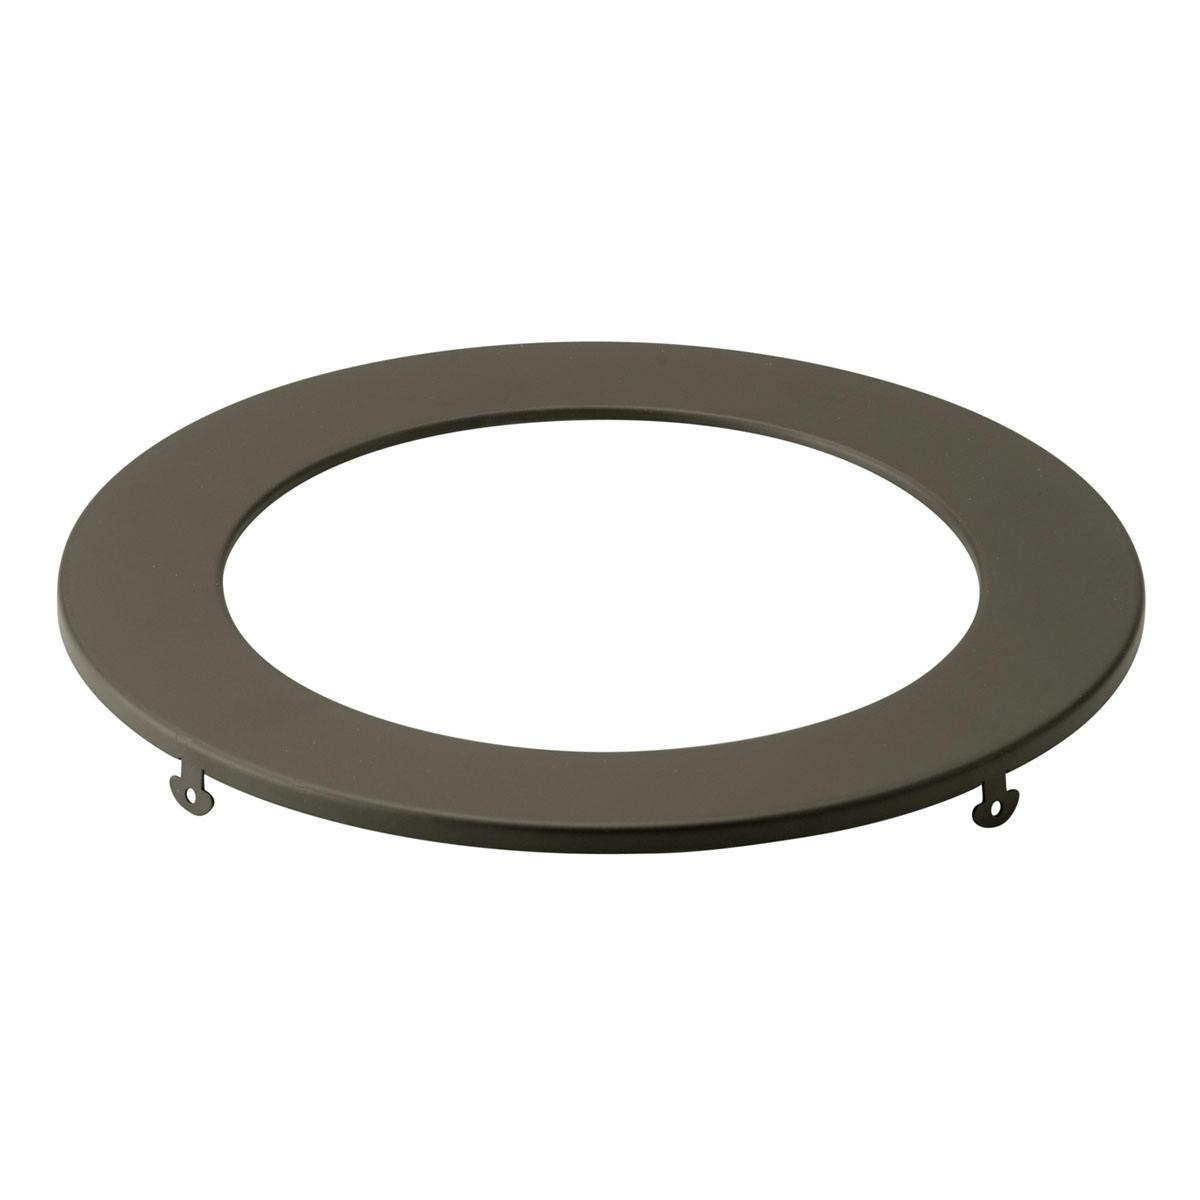 Direct to Ceiling Unv Accessor Direct to Ceiling Trim DLTSL06ROZ